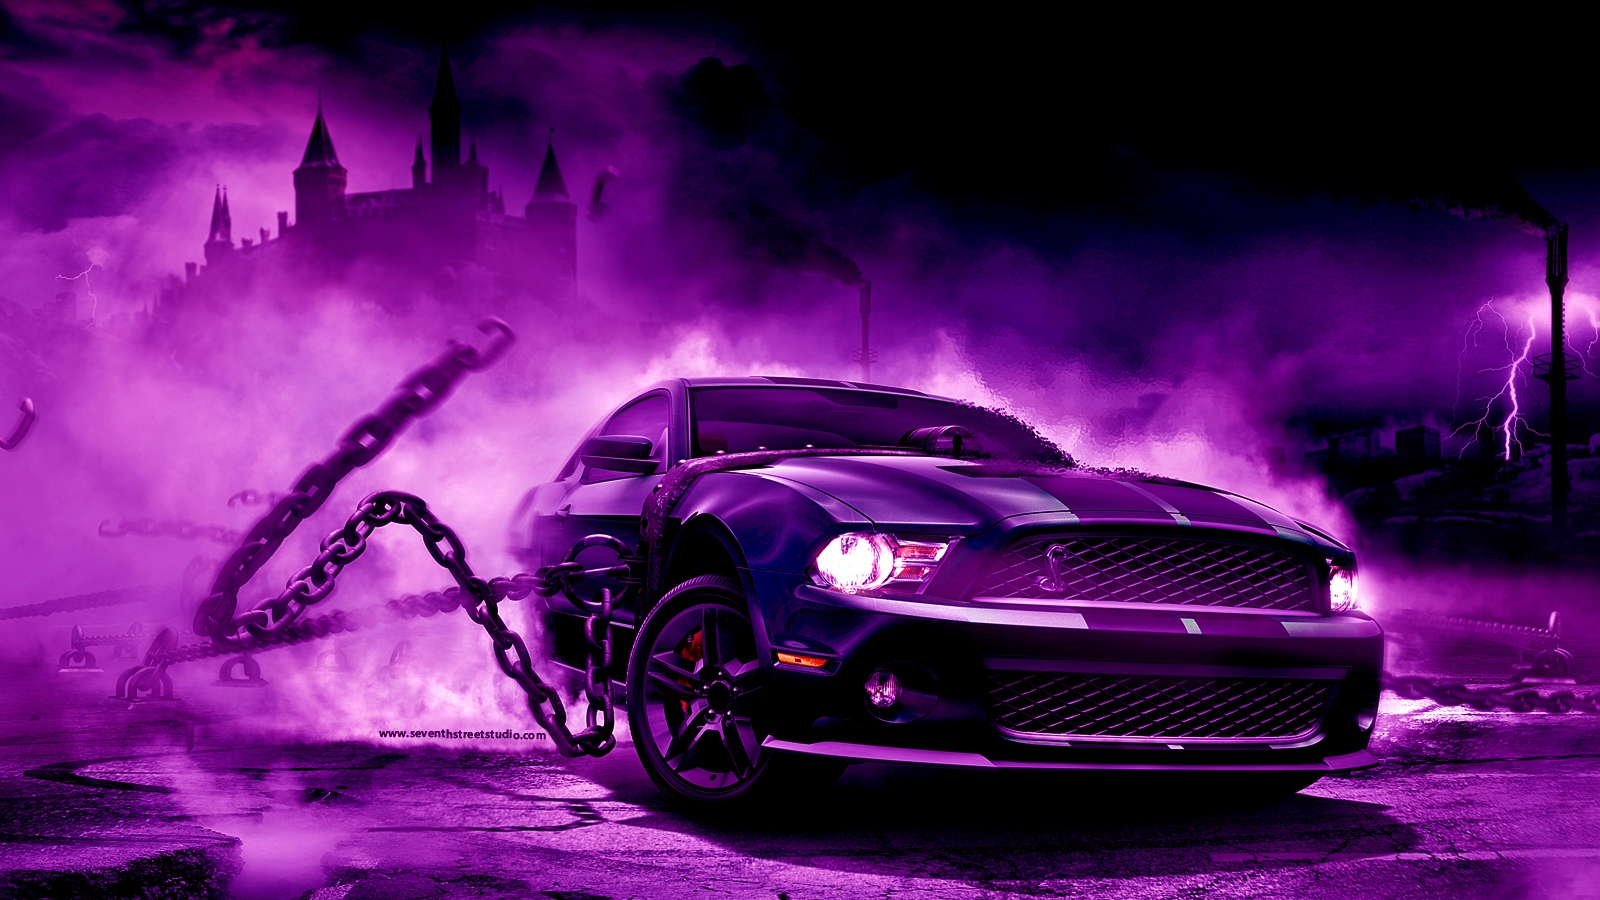 3d hd wallpapers for mobile free download,vehicle,car,purple,shelby mustang,automotive design